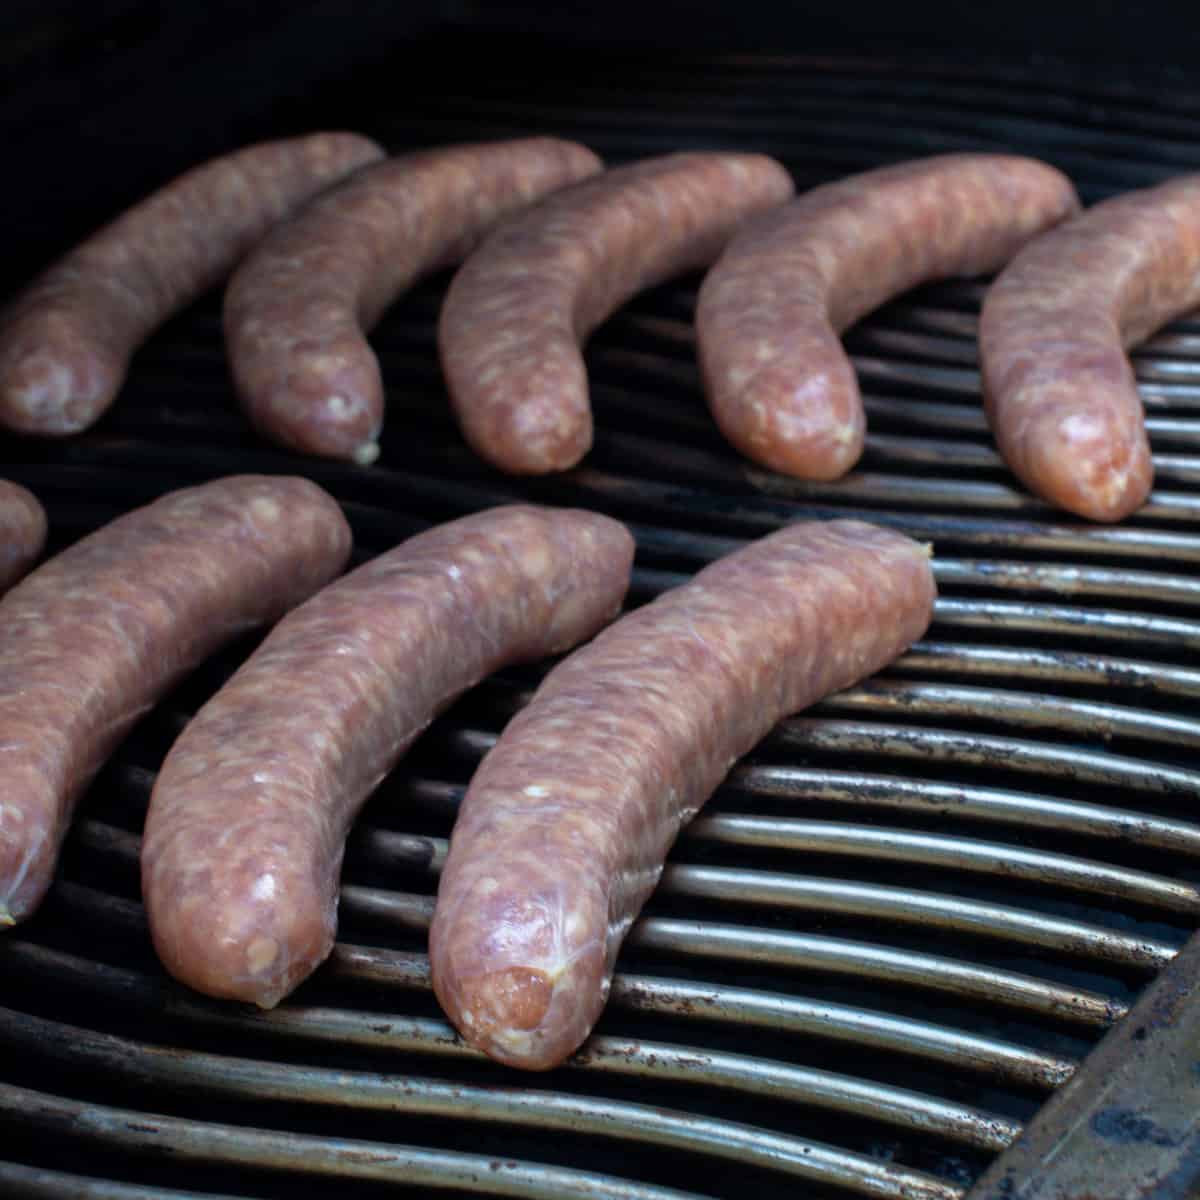 https://www.theblackpeppercorn.com/wp-content/uploads/2020/08/How-to-Grill-Italian-Sausages-Cook-1.jpg